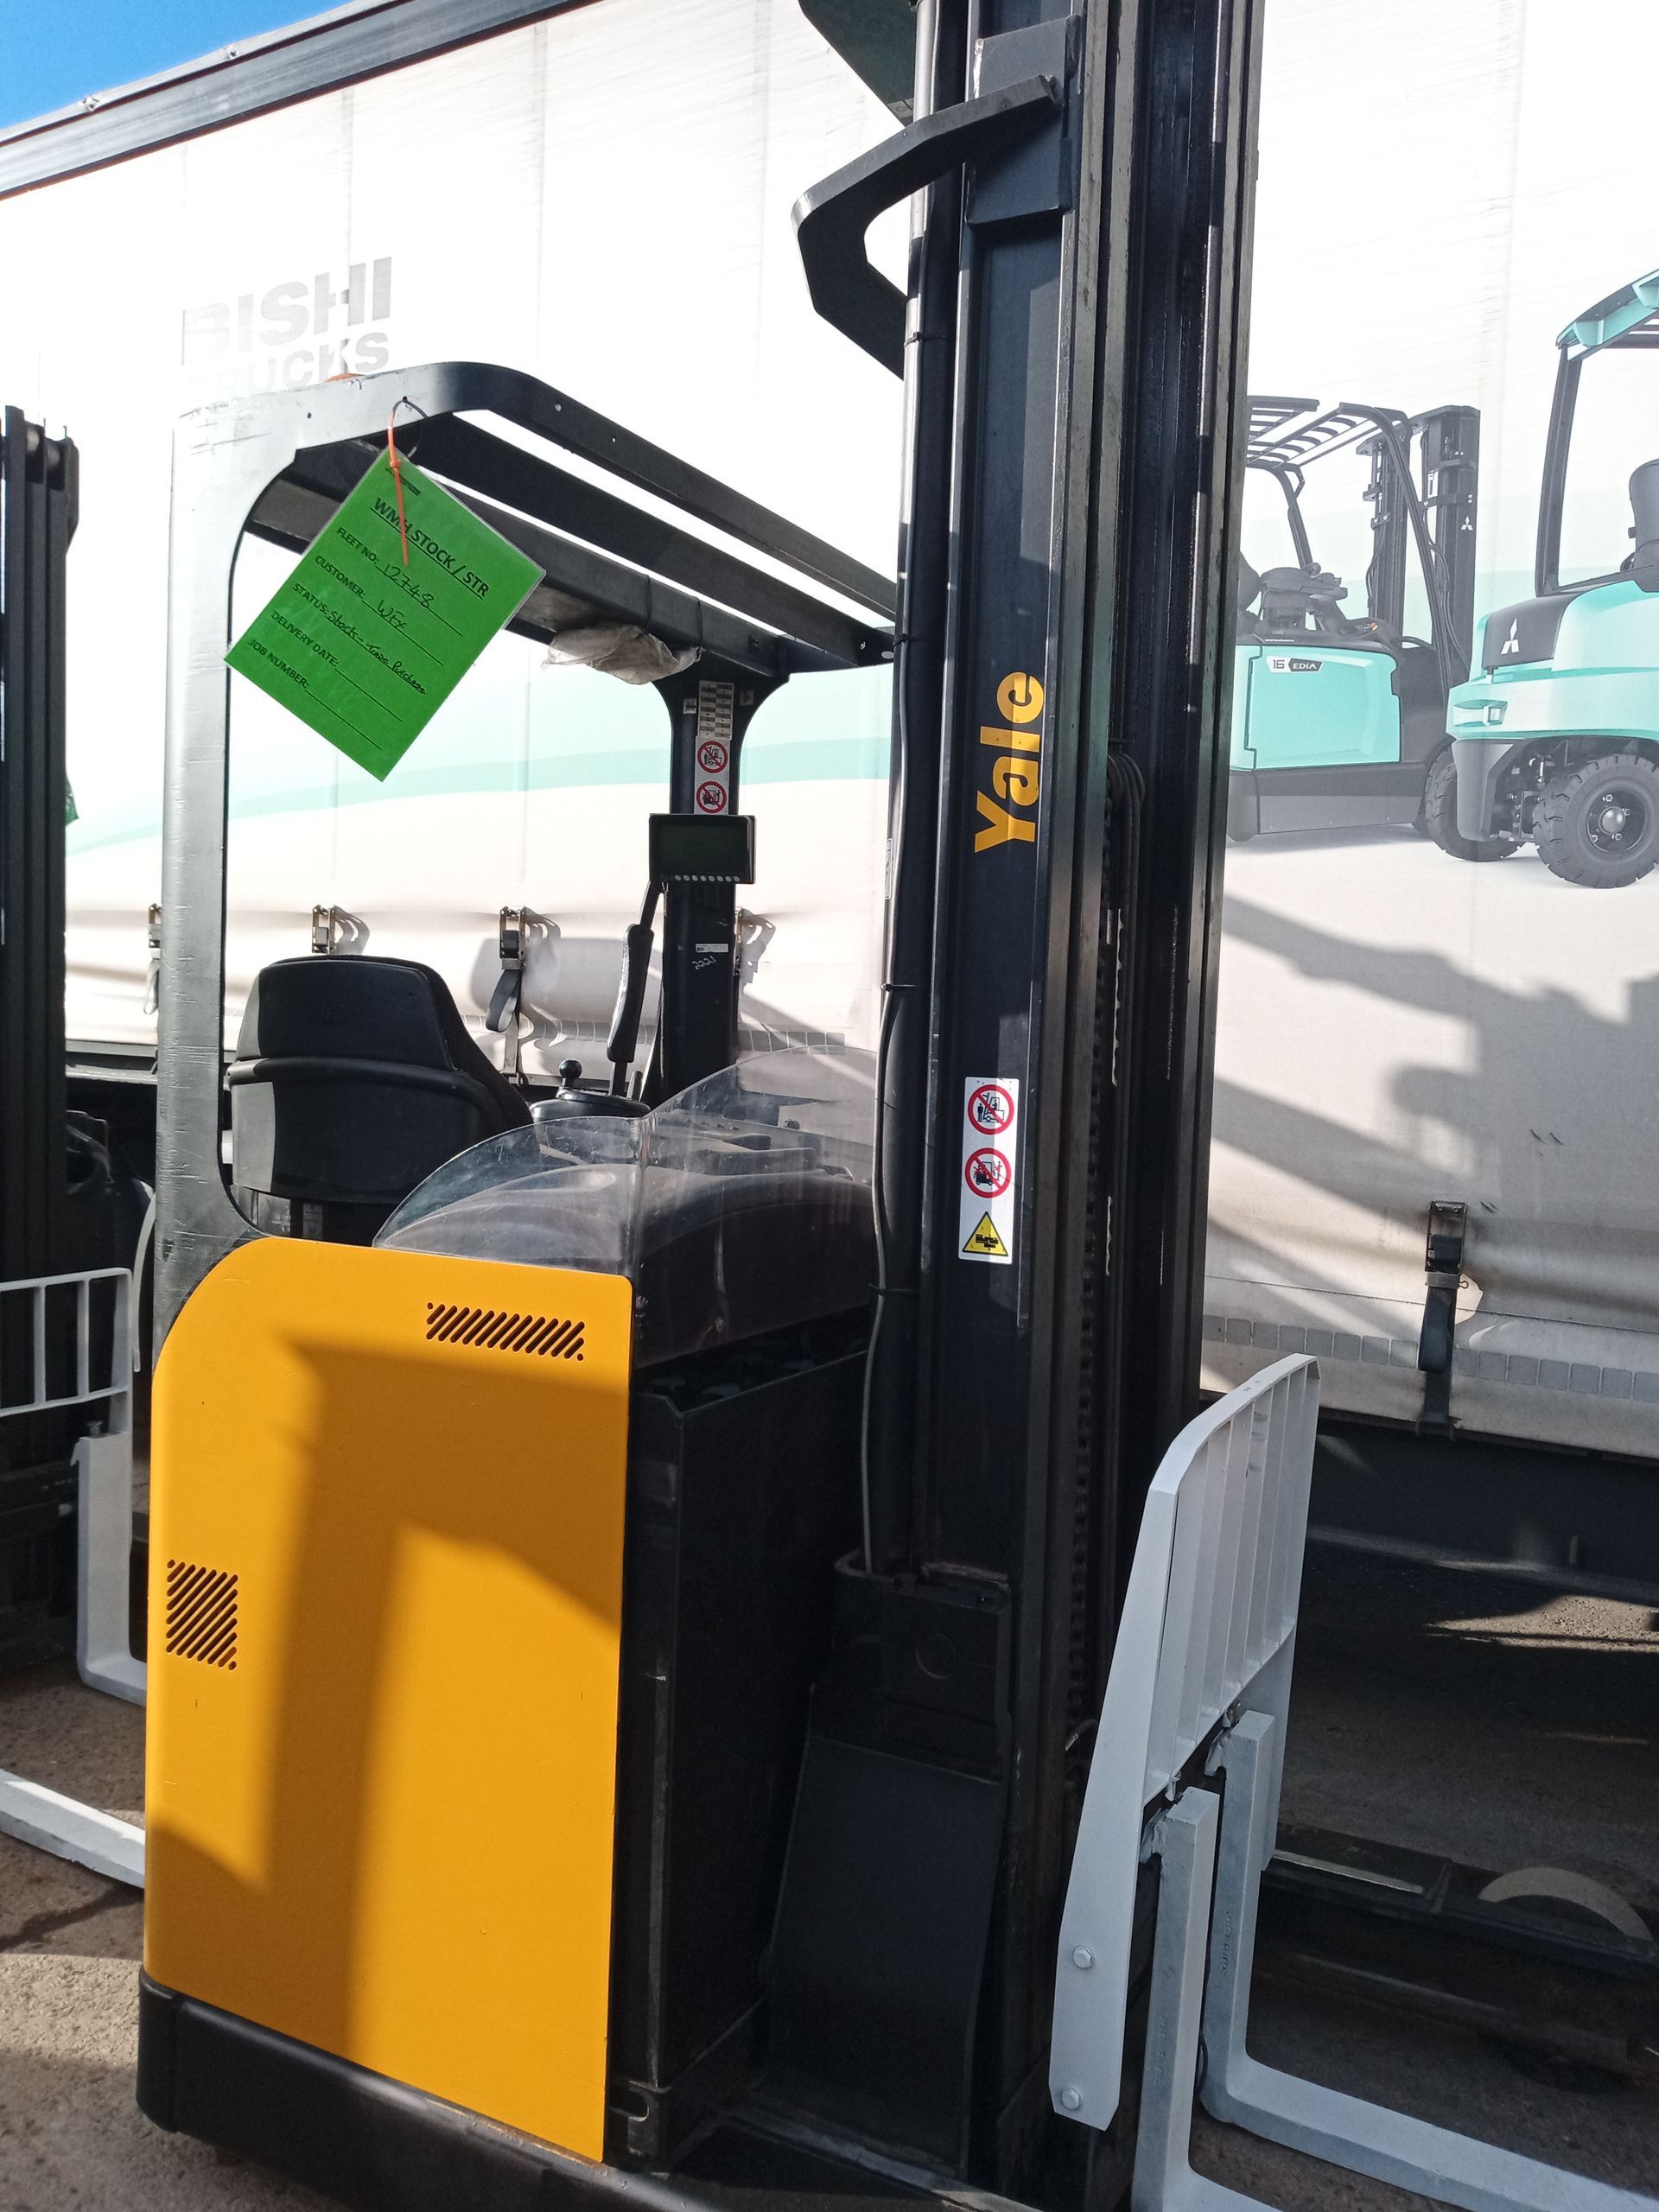 A yellow and black forklift is parked in front of a white truck.